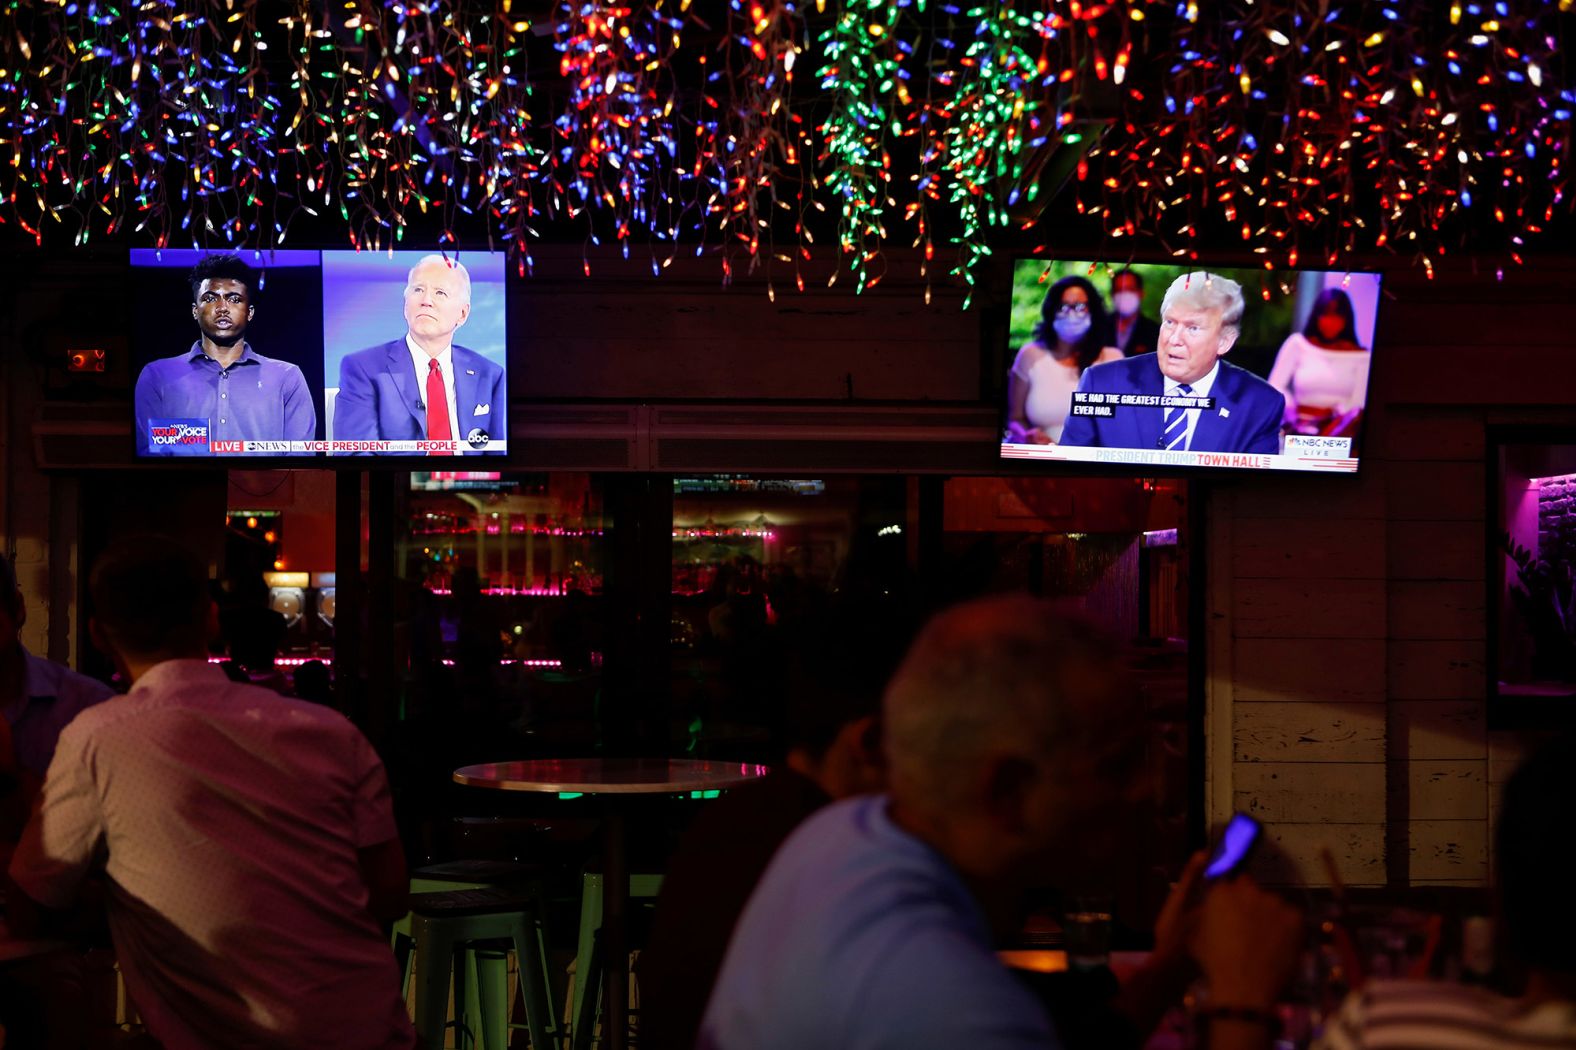 Television monitors show both town halls at the Luv Child restaurant in Tampa, Florida.